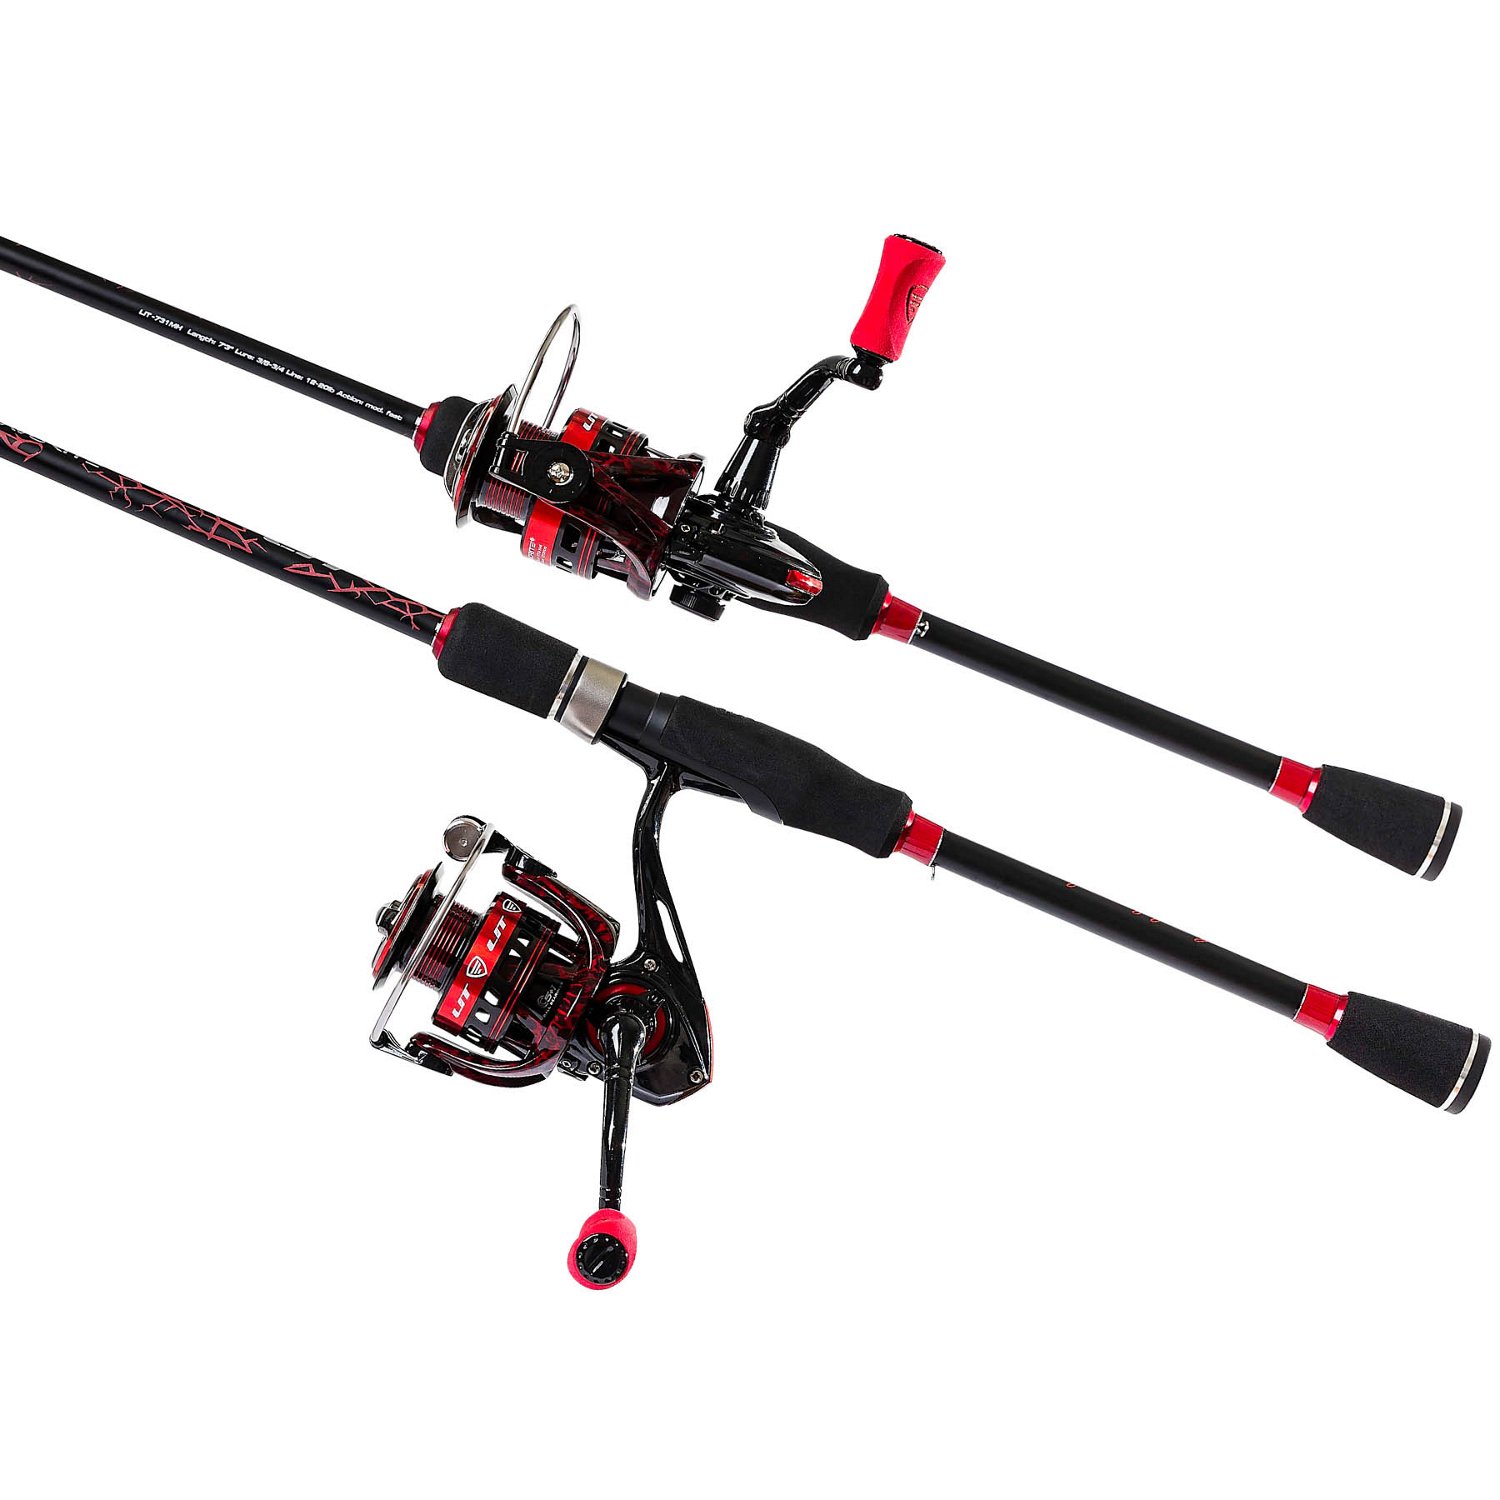 Favorite Fishing Lit 3000 Series 7 ft 3 in MH Spinning Rod and Reel Combo